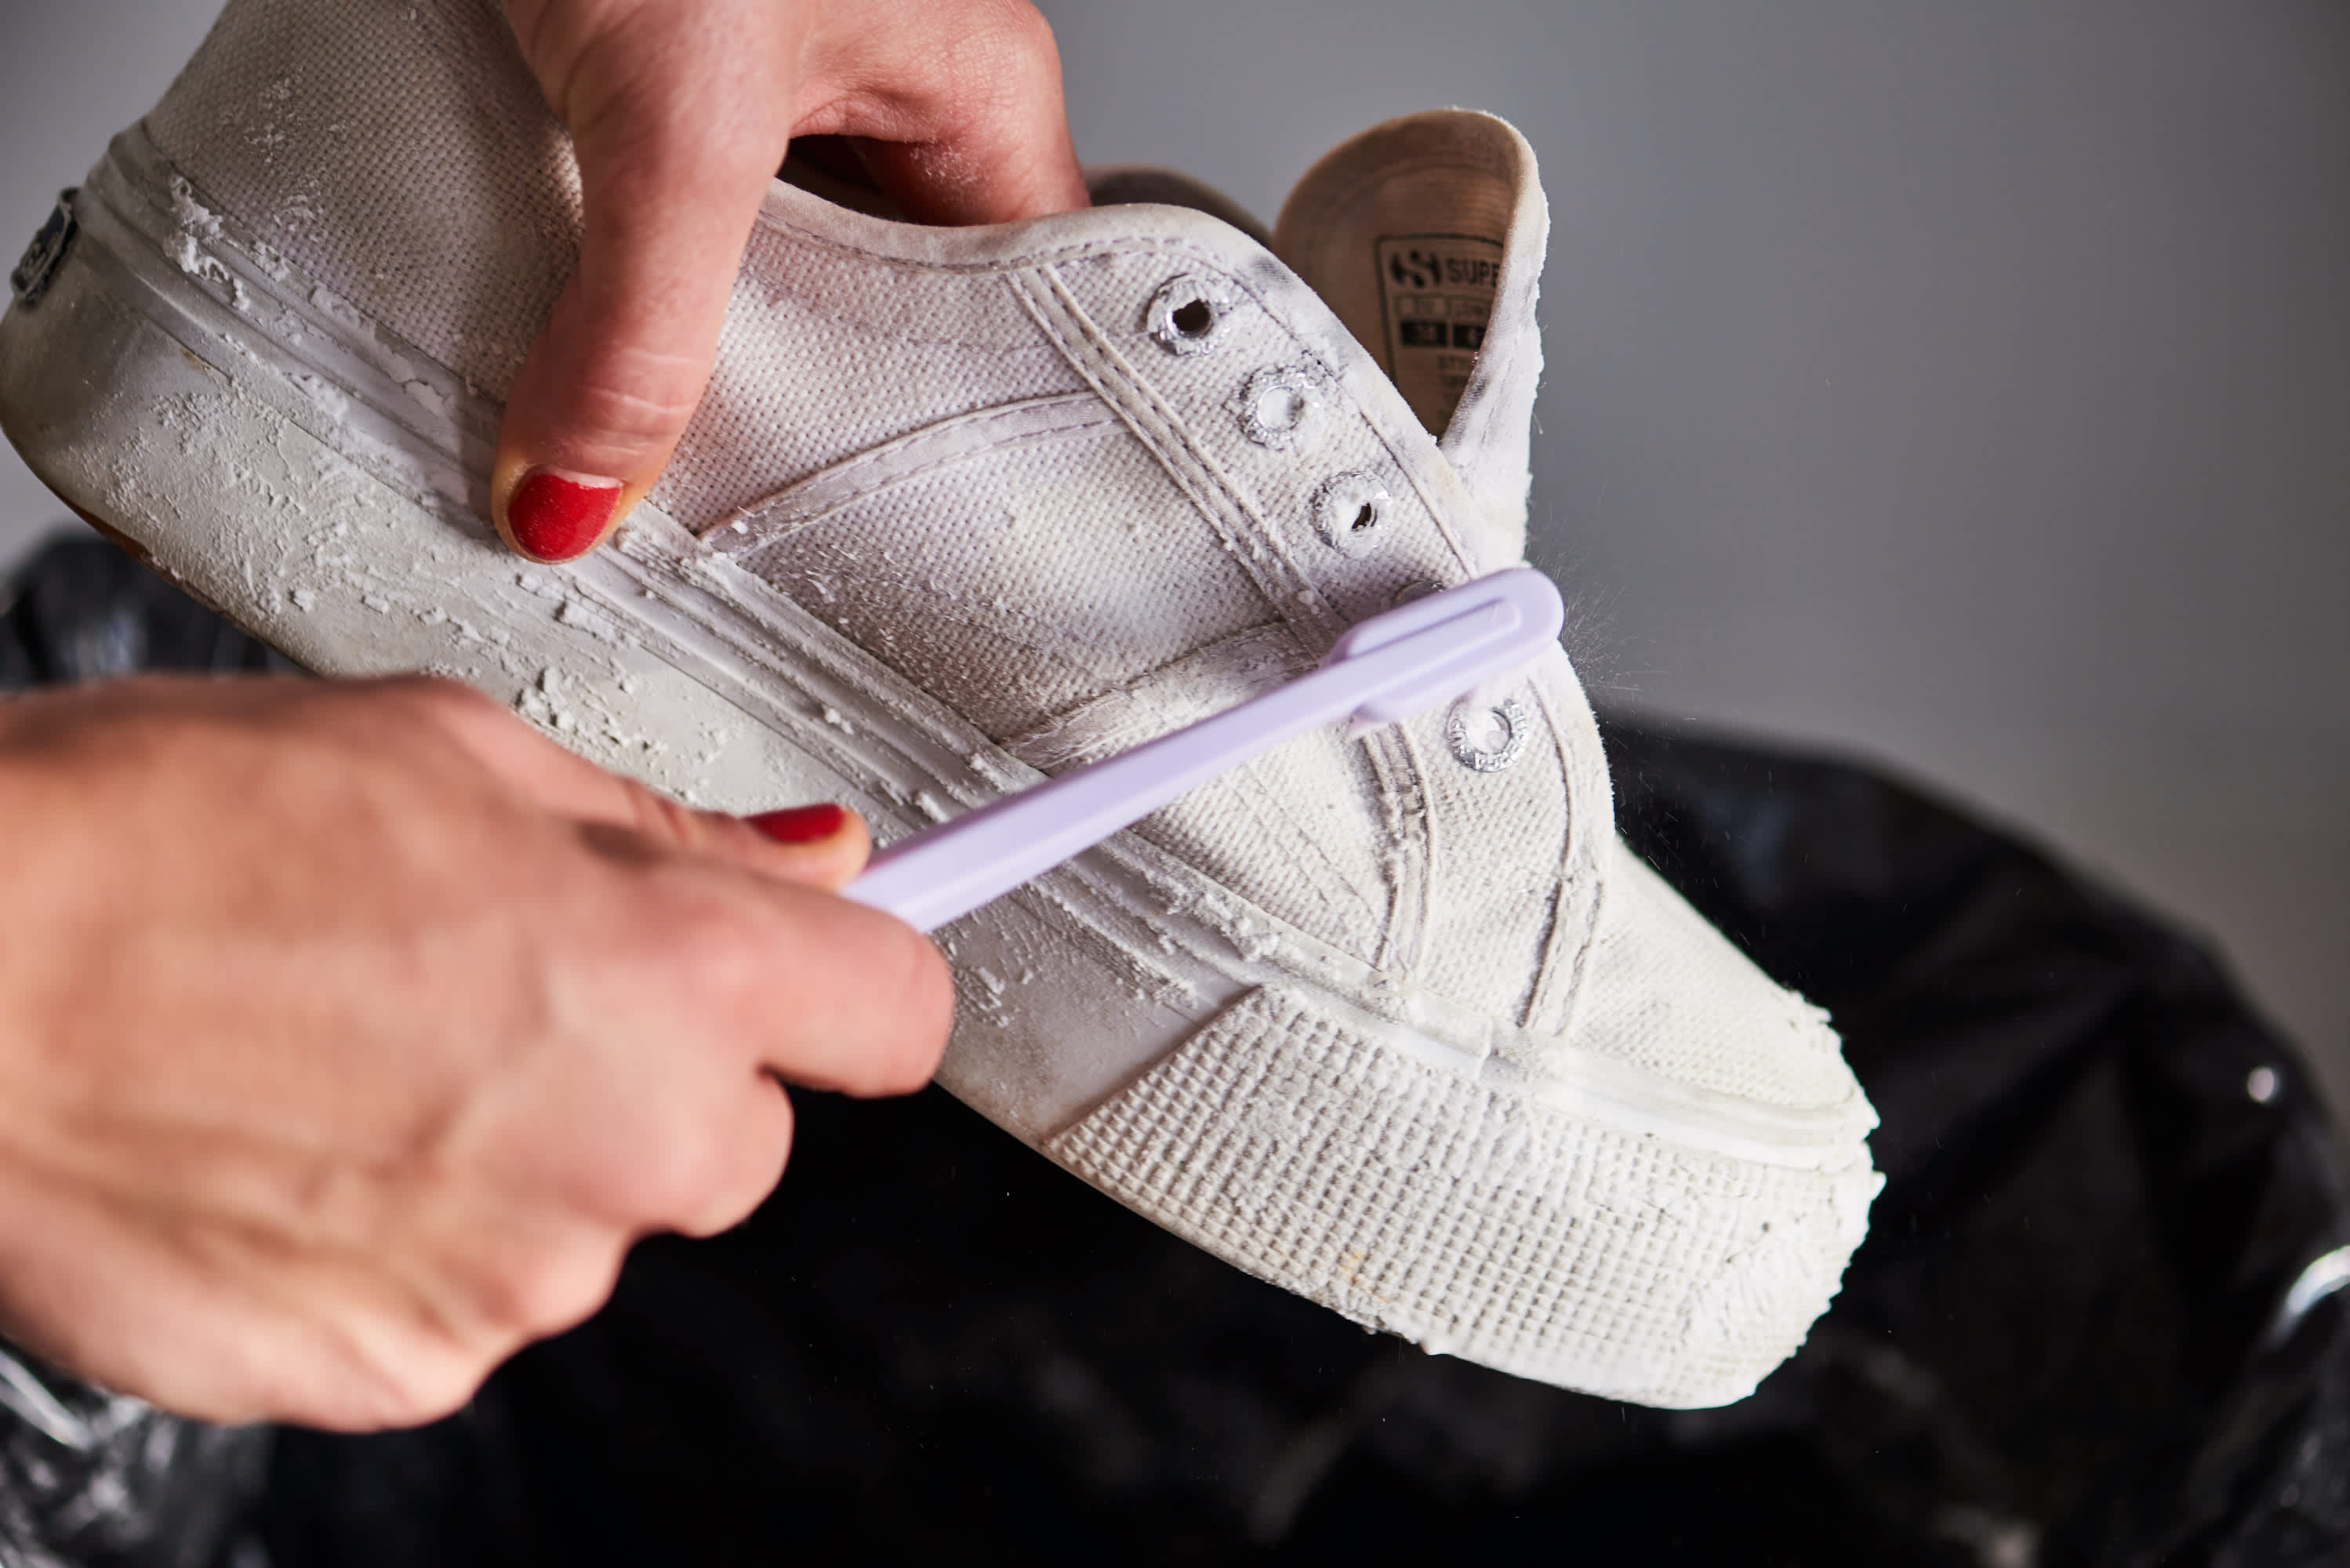 how to clean canvas supergas Shop Clothing & Shoes Online